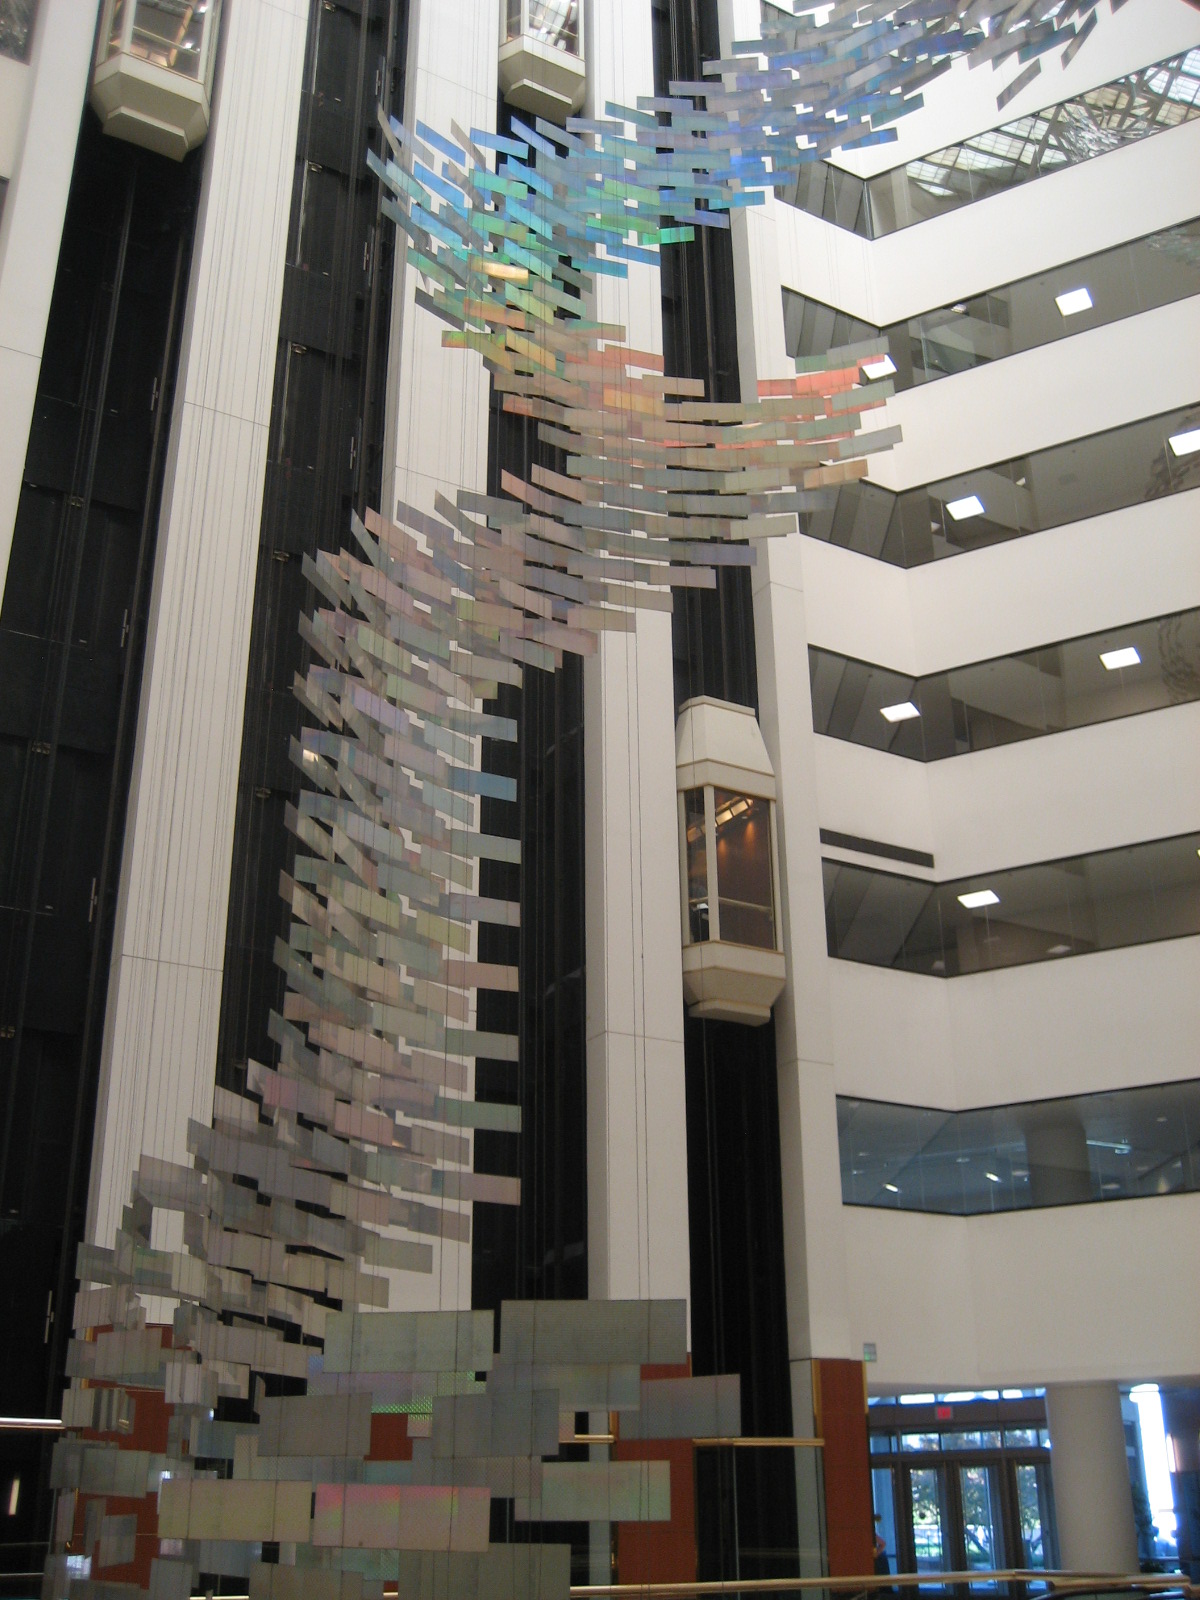 "Fishes" by Bill Wainwright, 1985; 7450 Wisconsin Ave; Materials: Aluminum; 12 stories, 20ft tall.